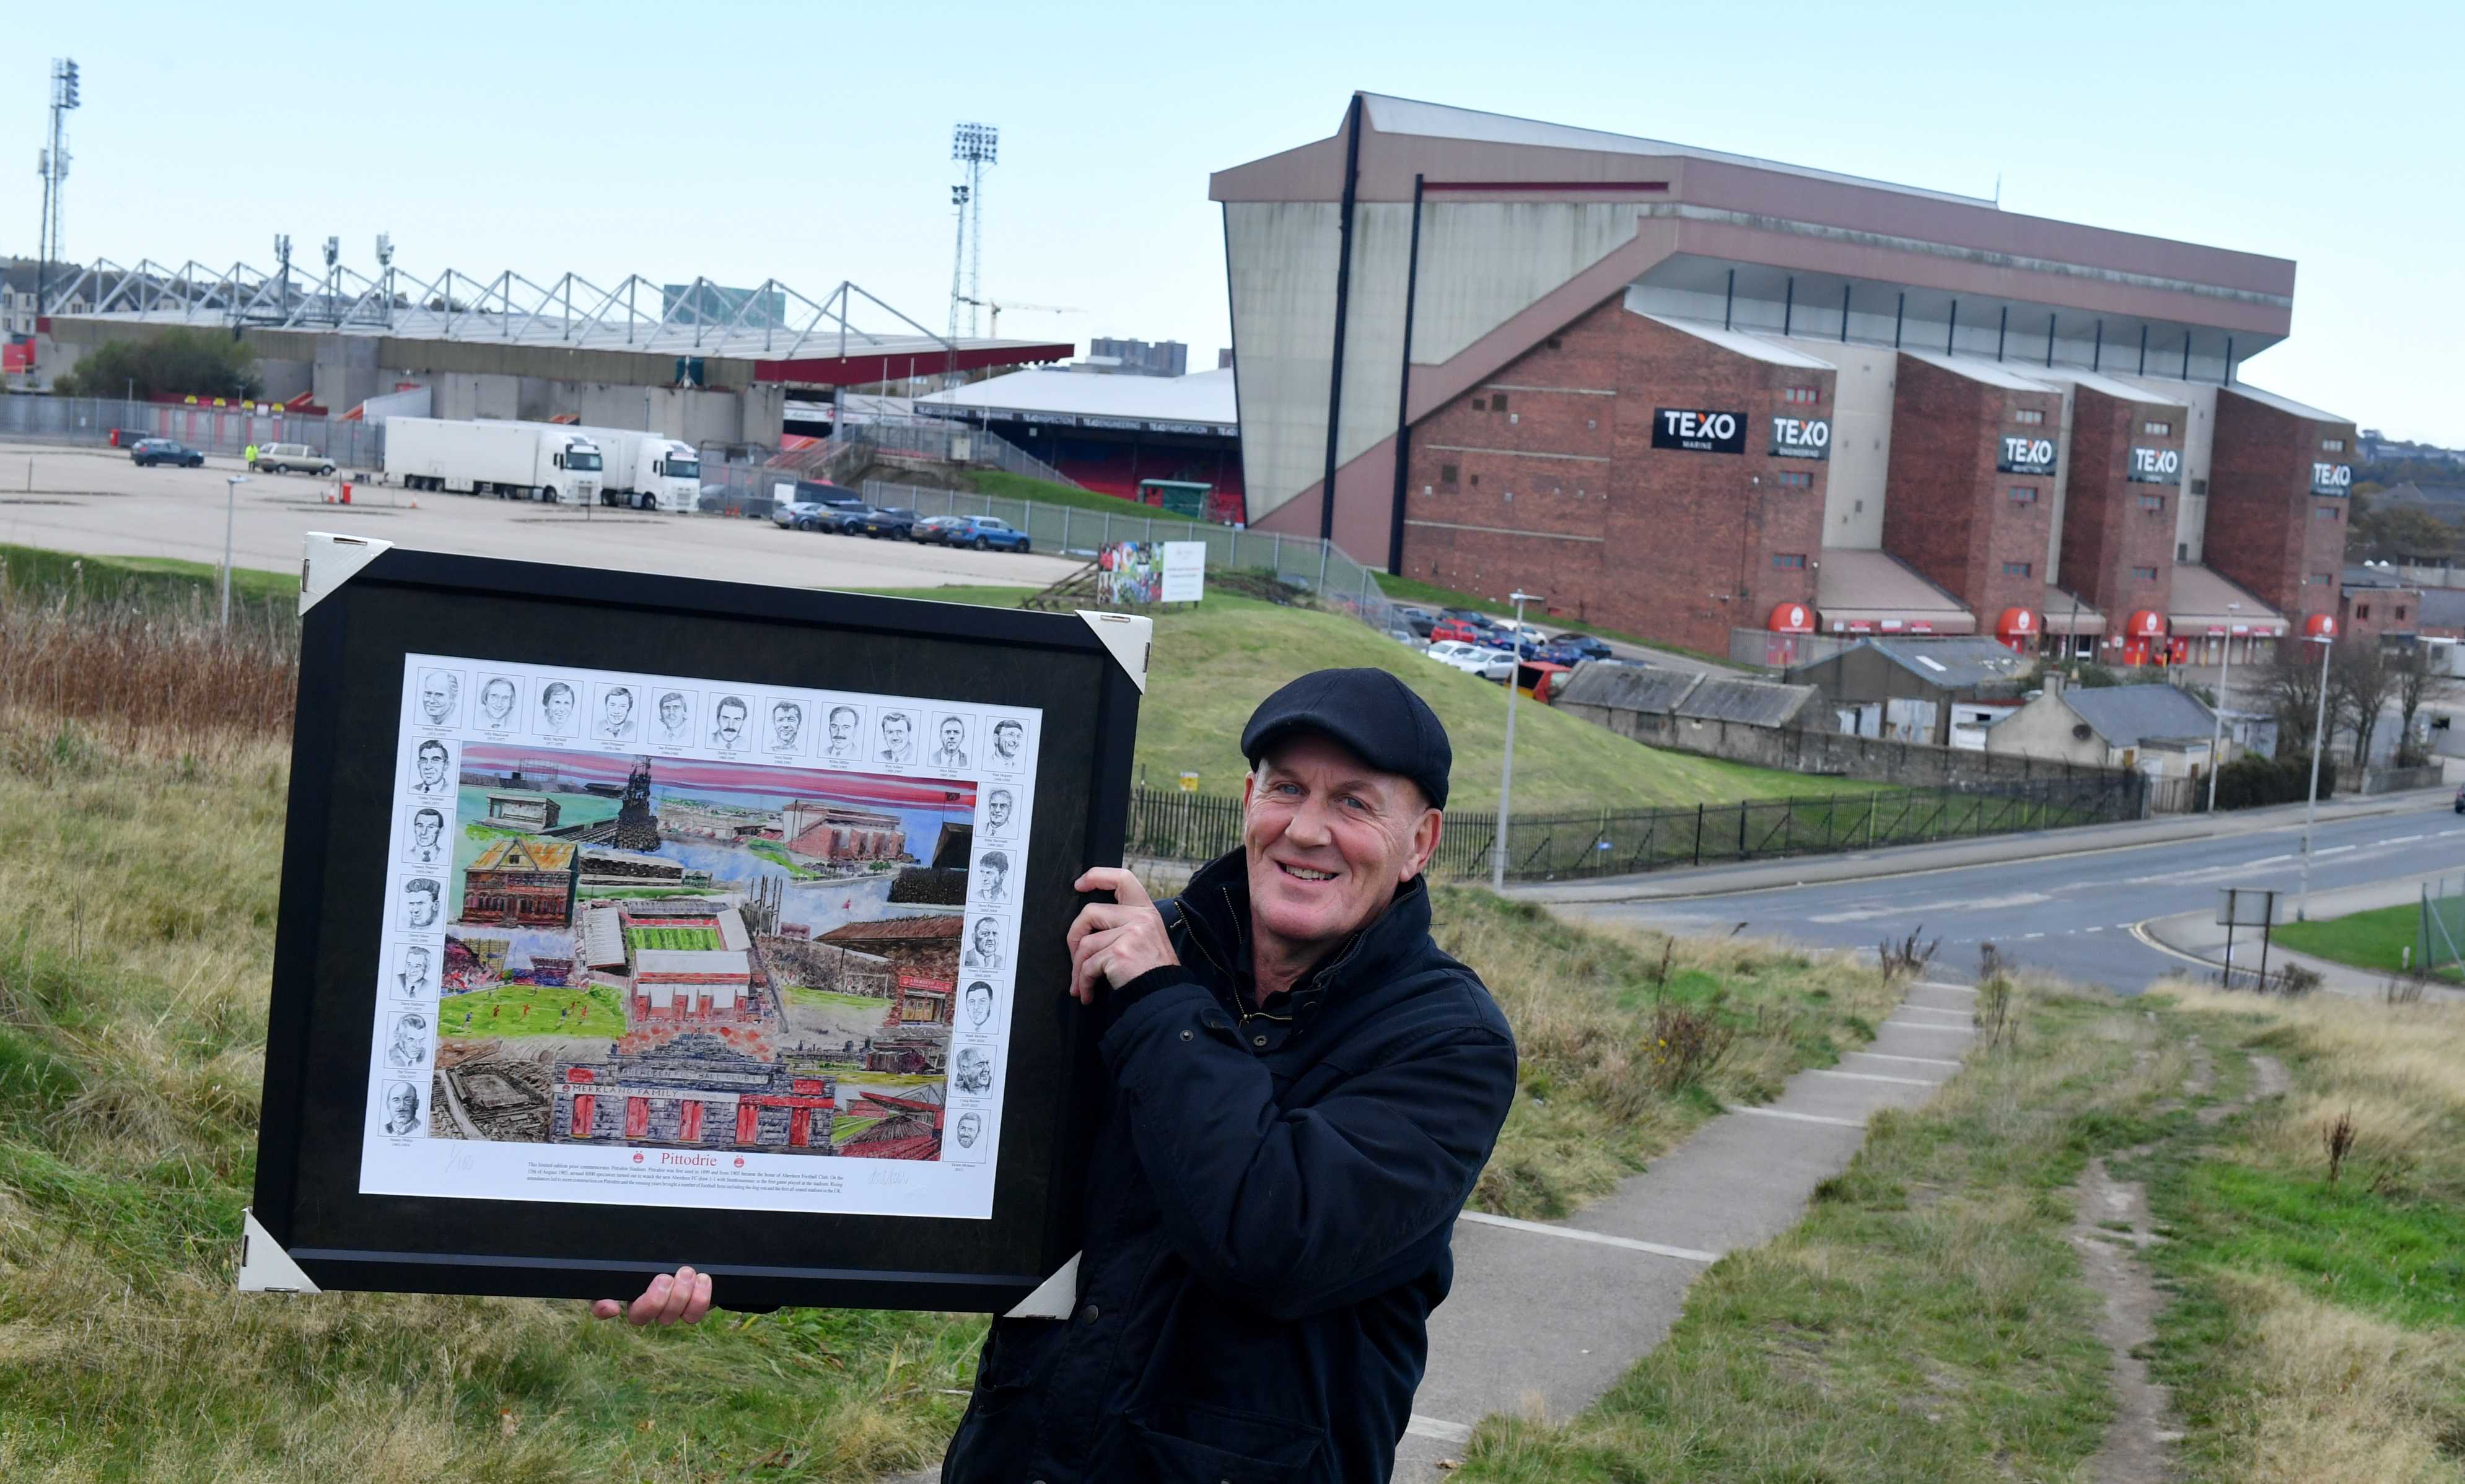 George Dow with his commemorative painting of Pittodrie Stadium.